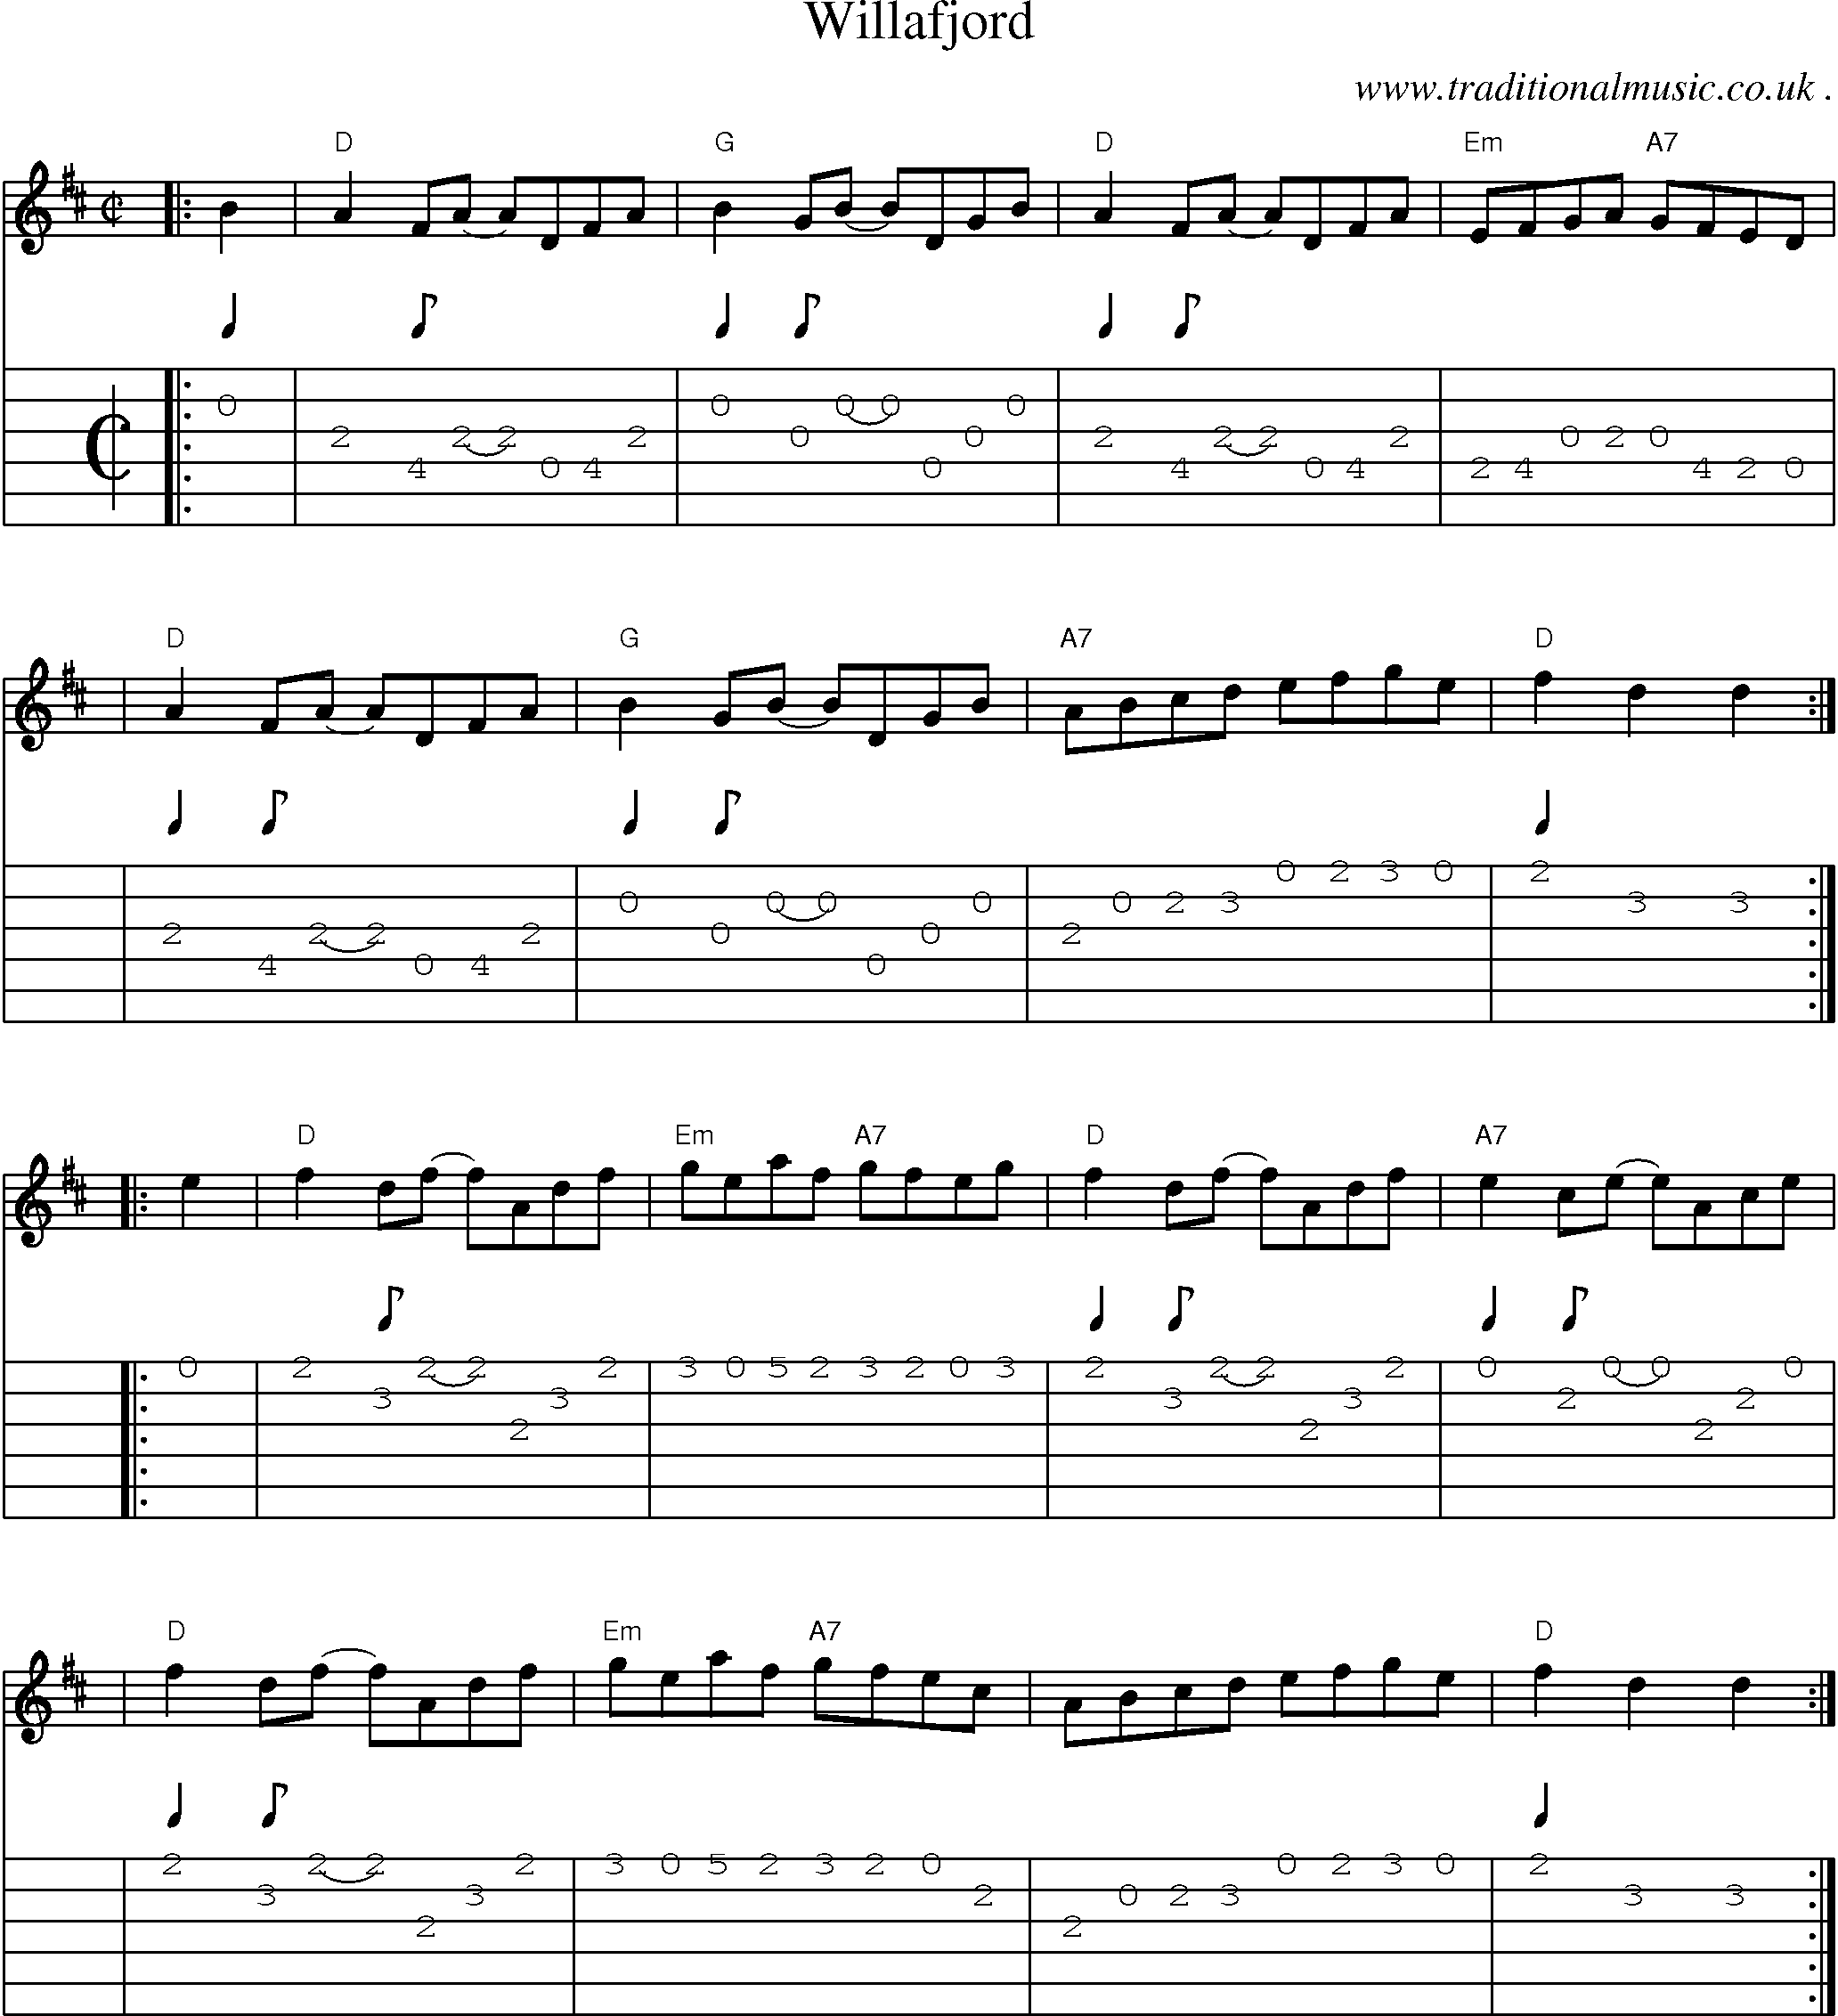 Sheet-music  score, Chords and Guitar Tabs for Willafjord